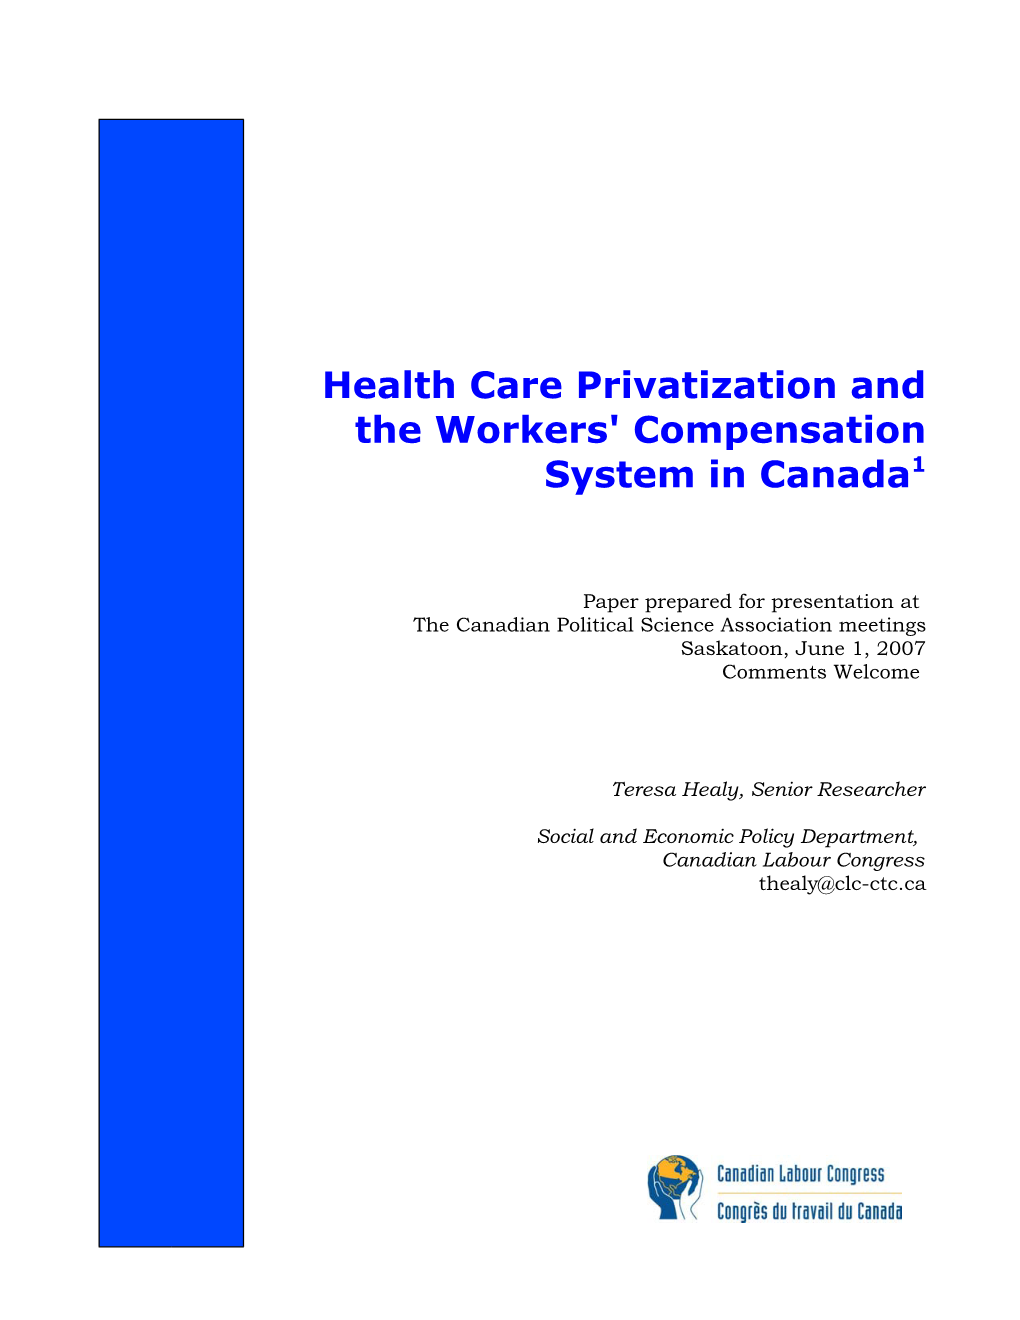 Health Care Privatization and the Workers' Compensation System in Canada1